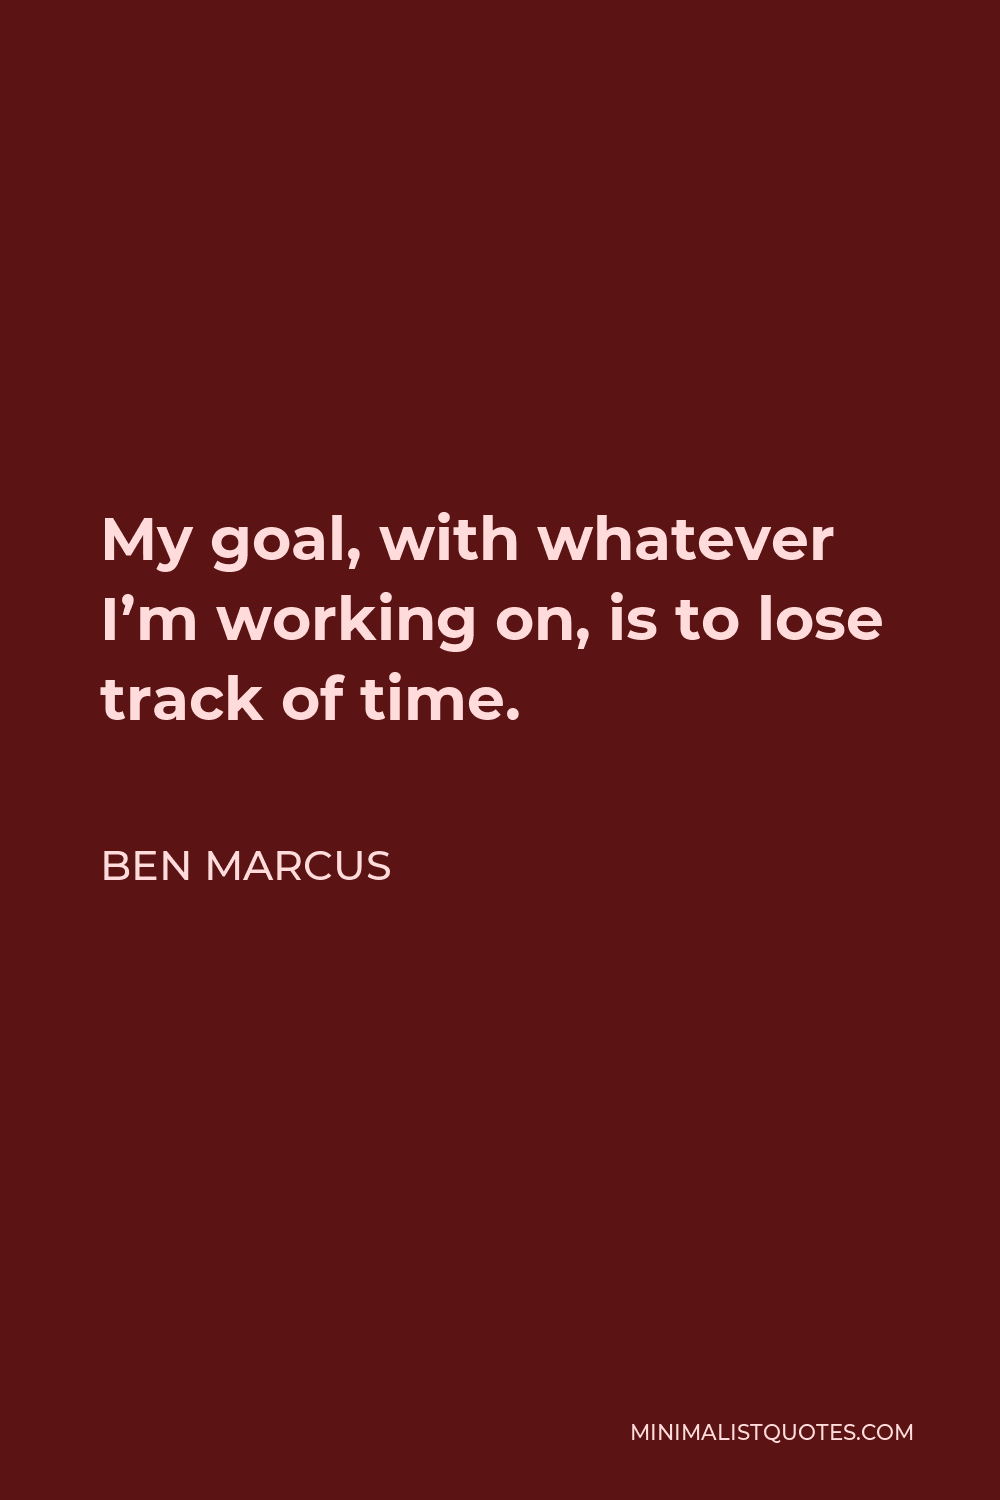 Ben Marcus Quote - My goal, with whatever I’m working on, is to lose track of time.